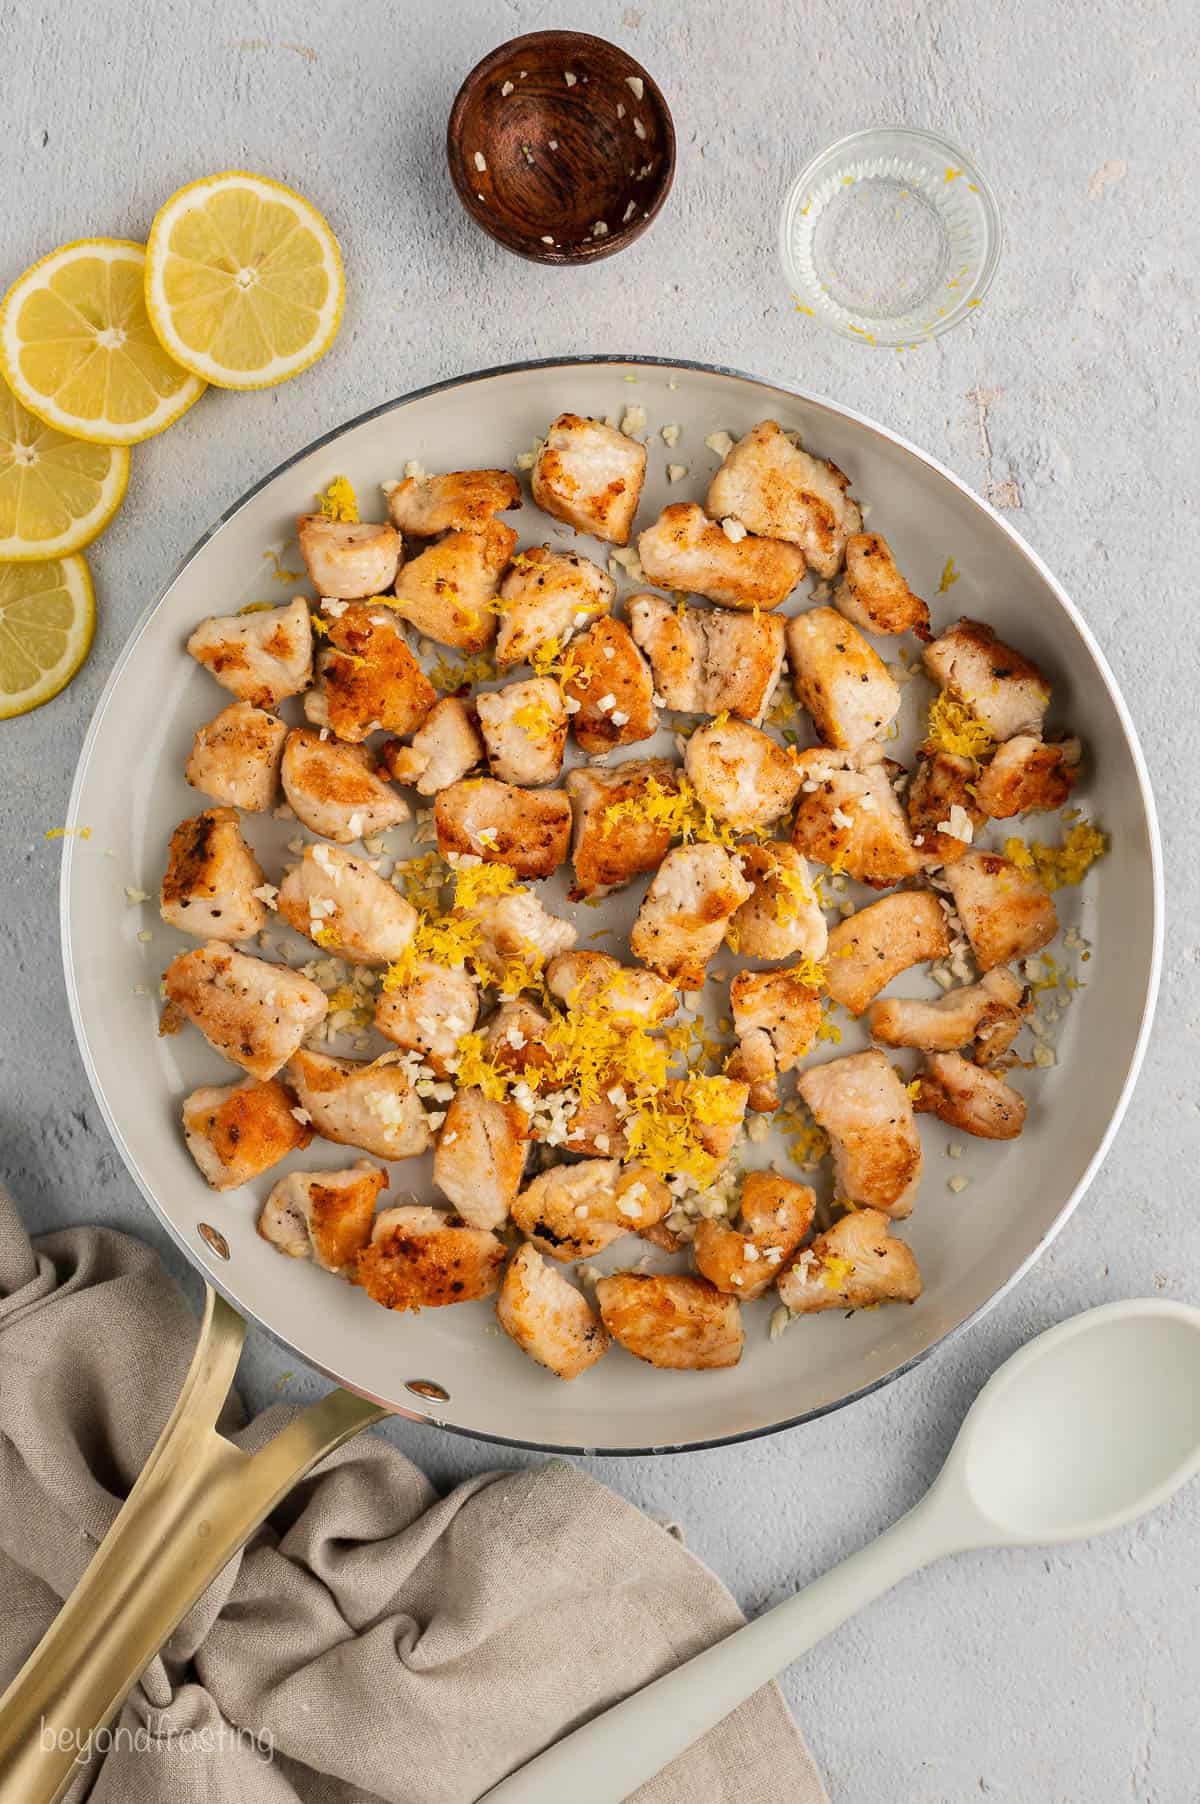 Chunks of chicken in a pan